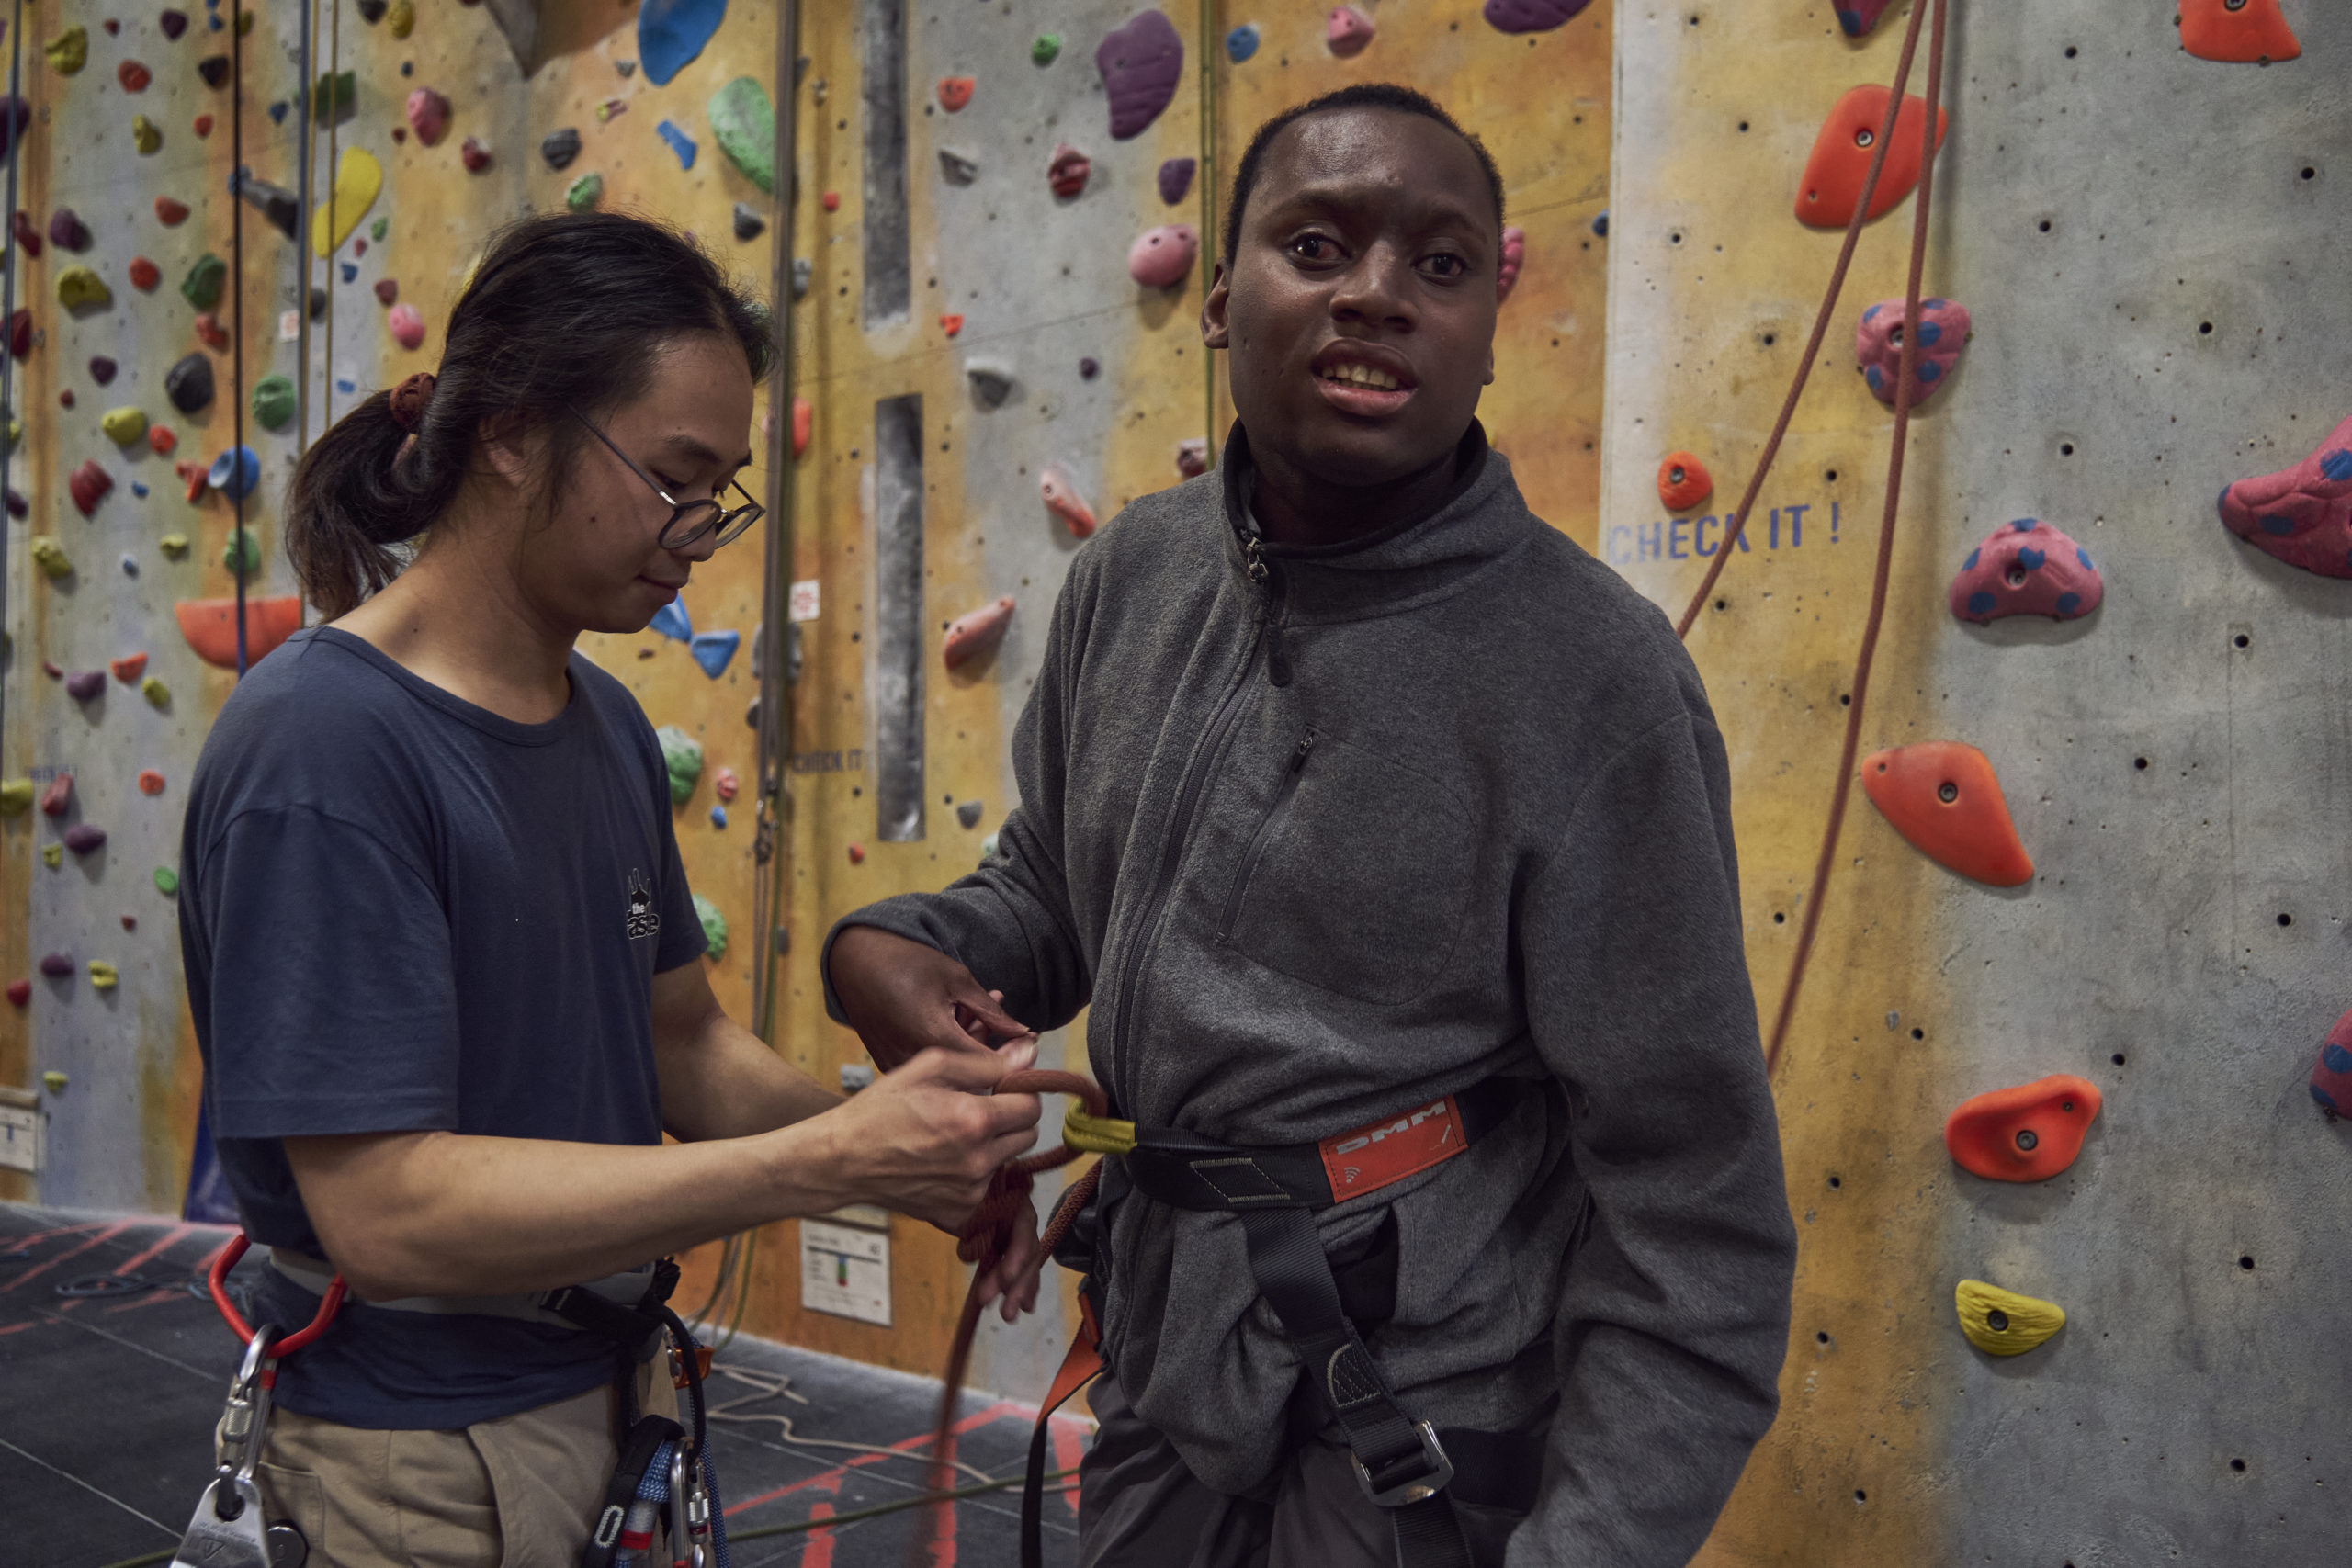 A young man stands in front of a climbing wall with brightly coloured grips. Another man helps him to attach his harness.